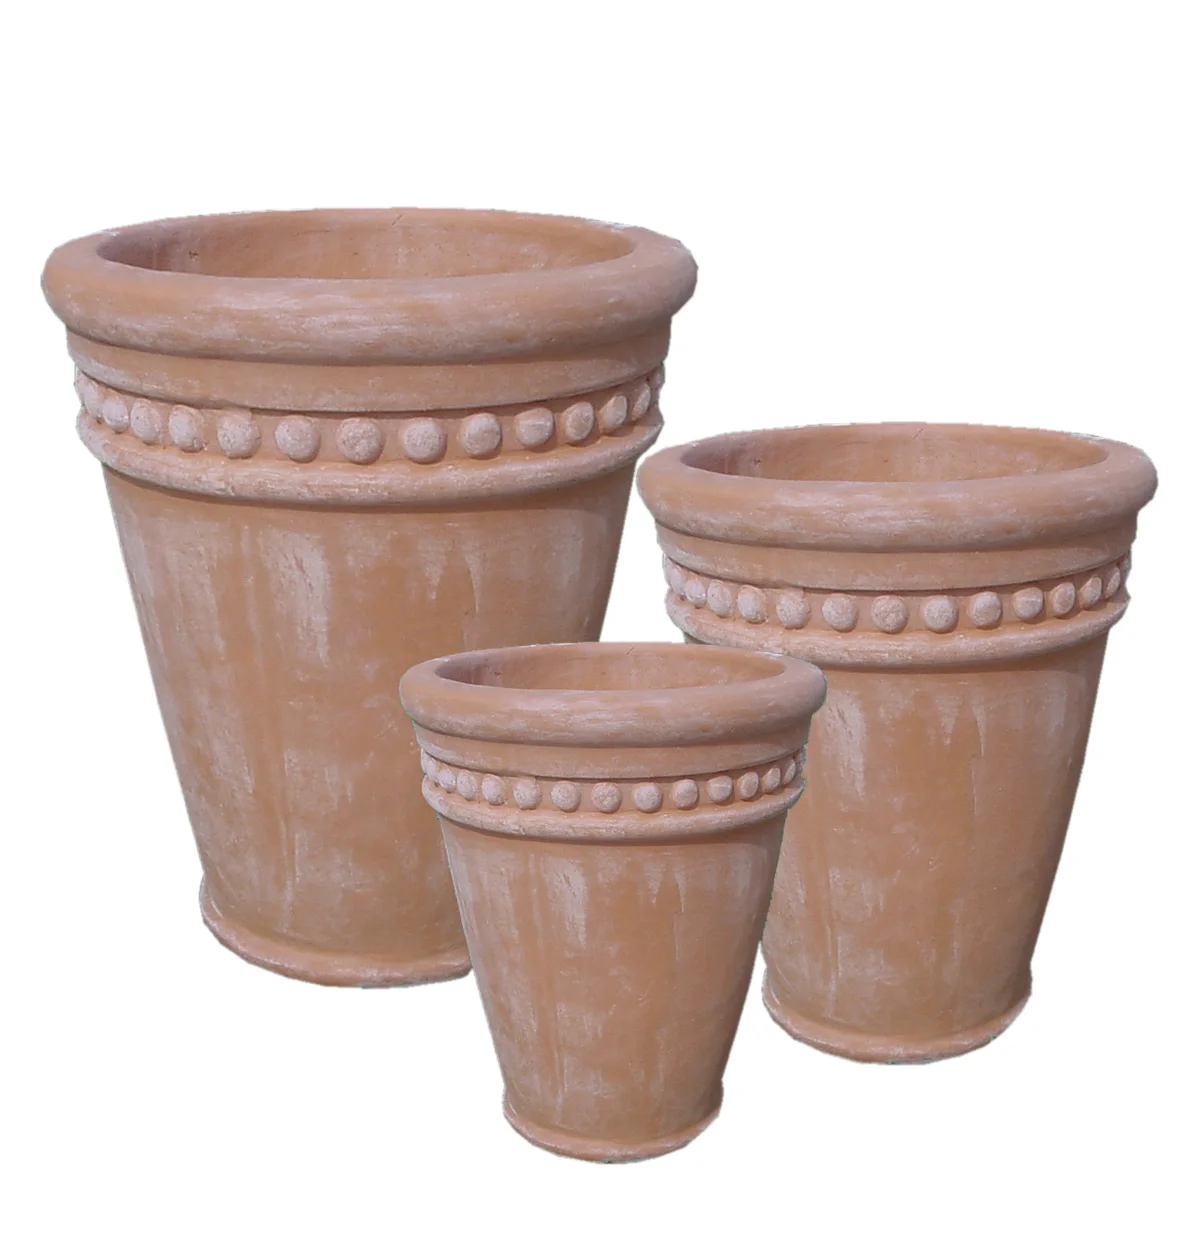 European Style Frost-Proof Ceramic Flower Pot Big Terracotta Pottery Planter for Outdoor Home Nursery Decoration for Garden Pot